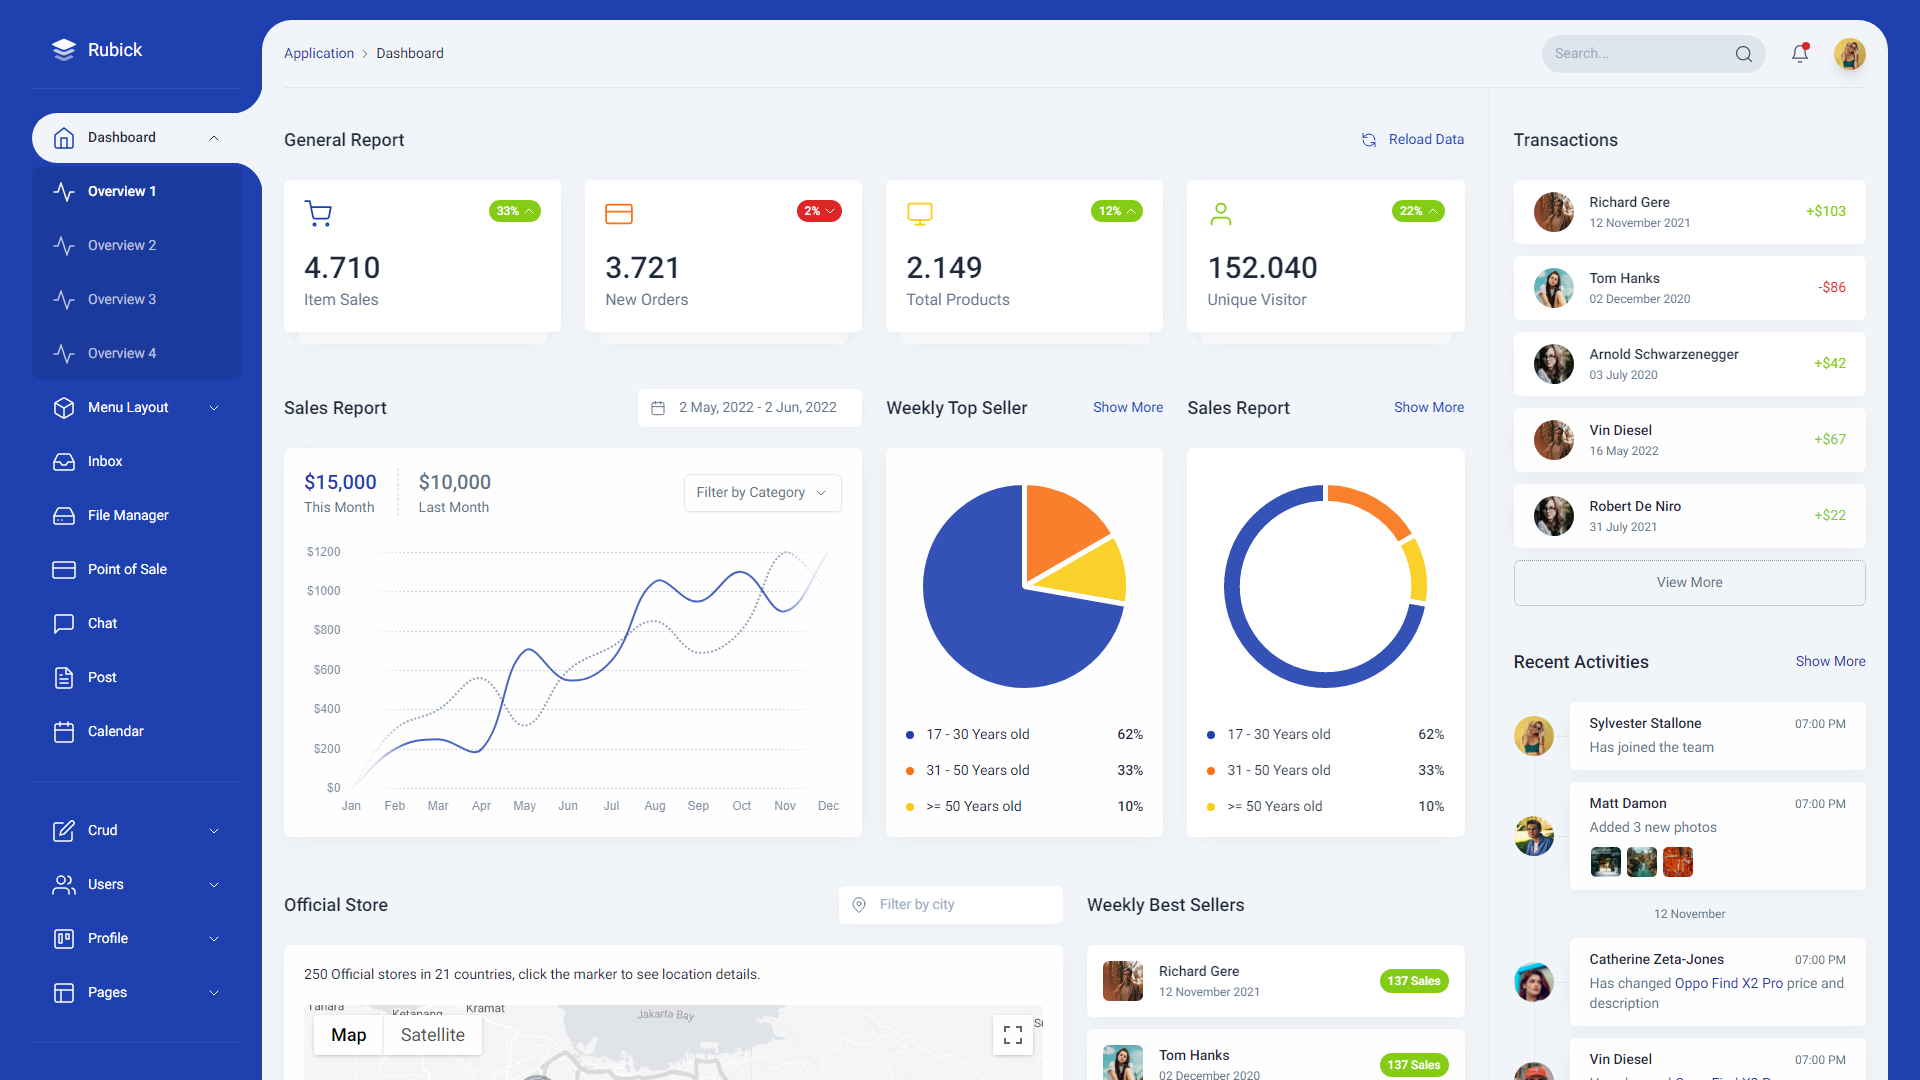 Marketing Dashboard  3 professional business dashboards every industry needs to run optimally 3 Professional Business Dashboards Every Industry Needs To Run Optimally marketing